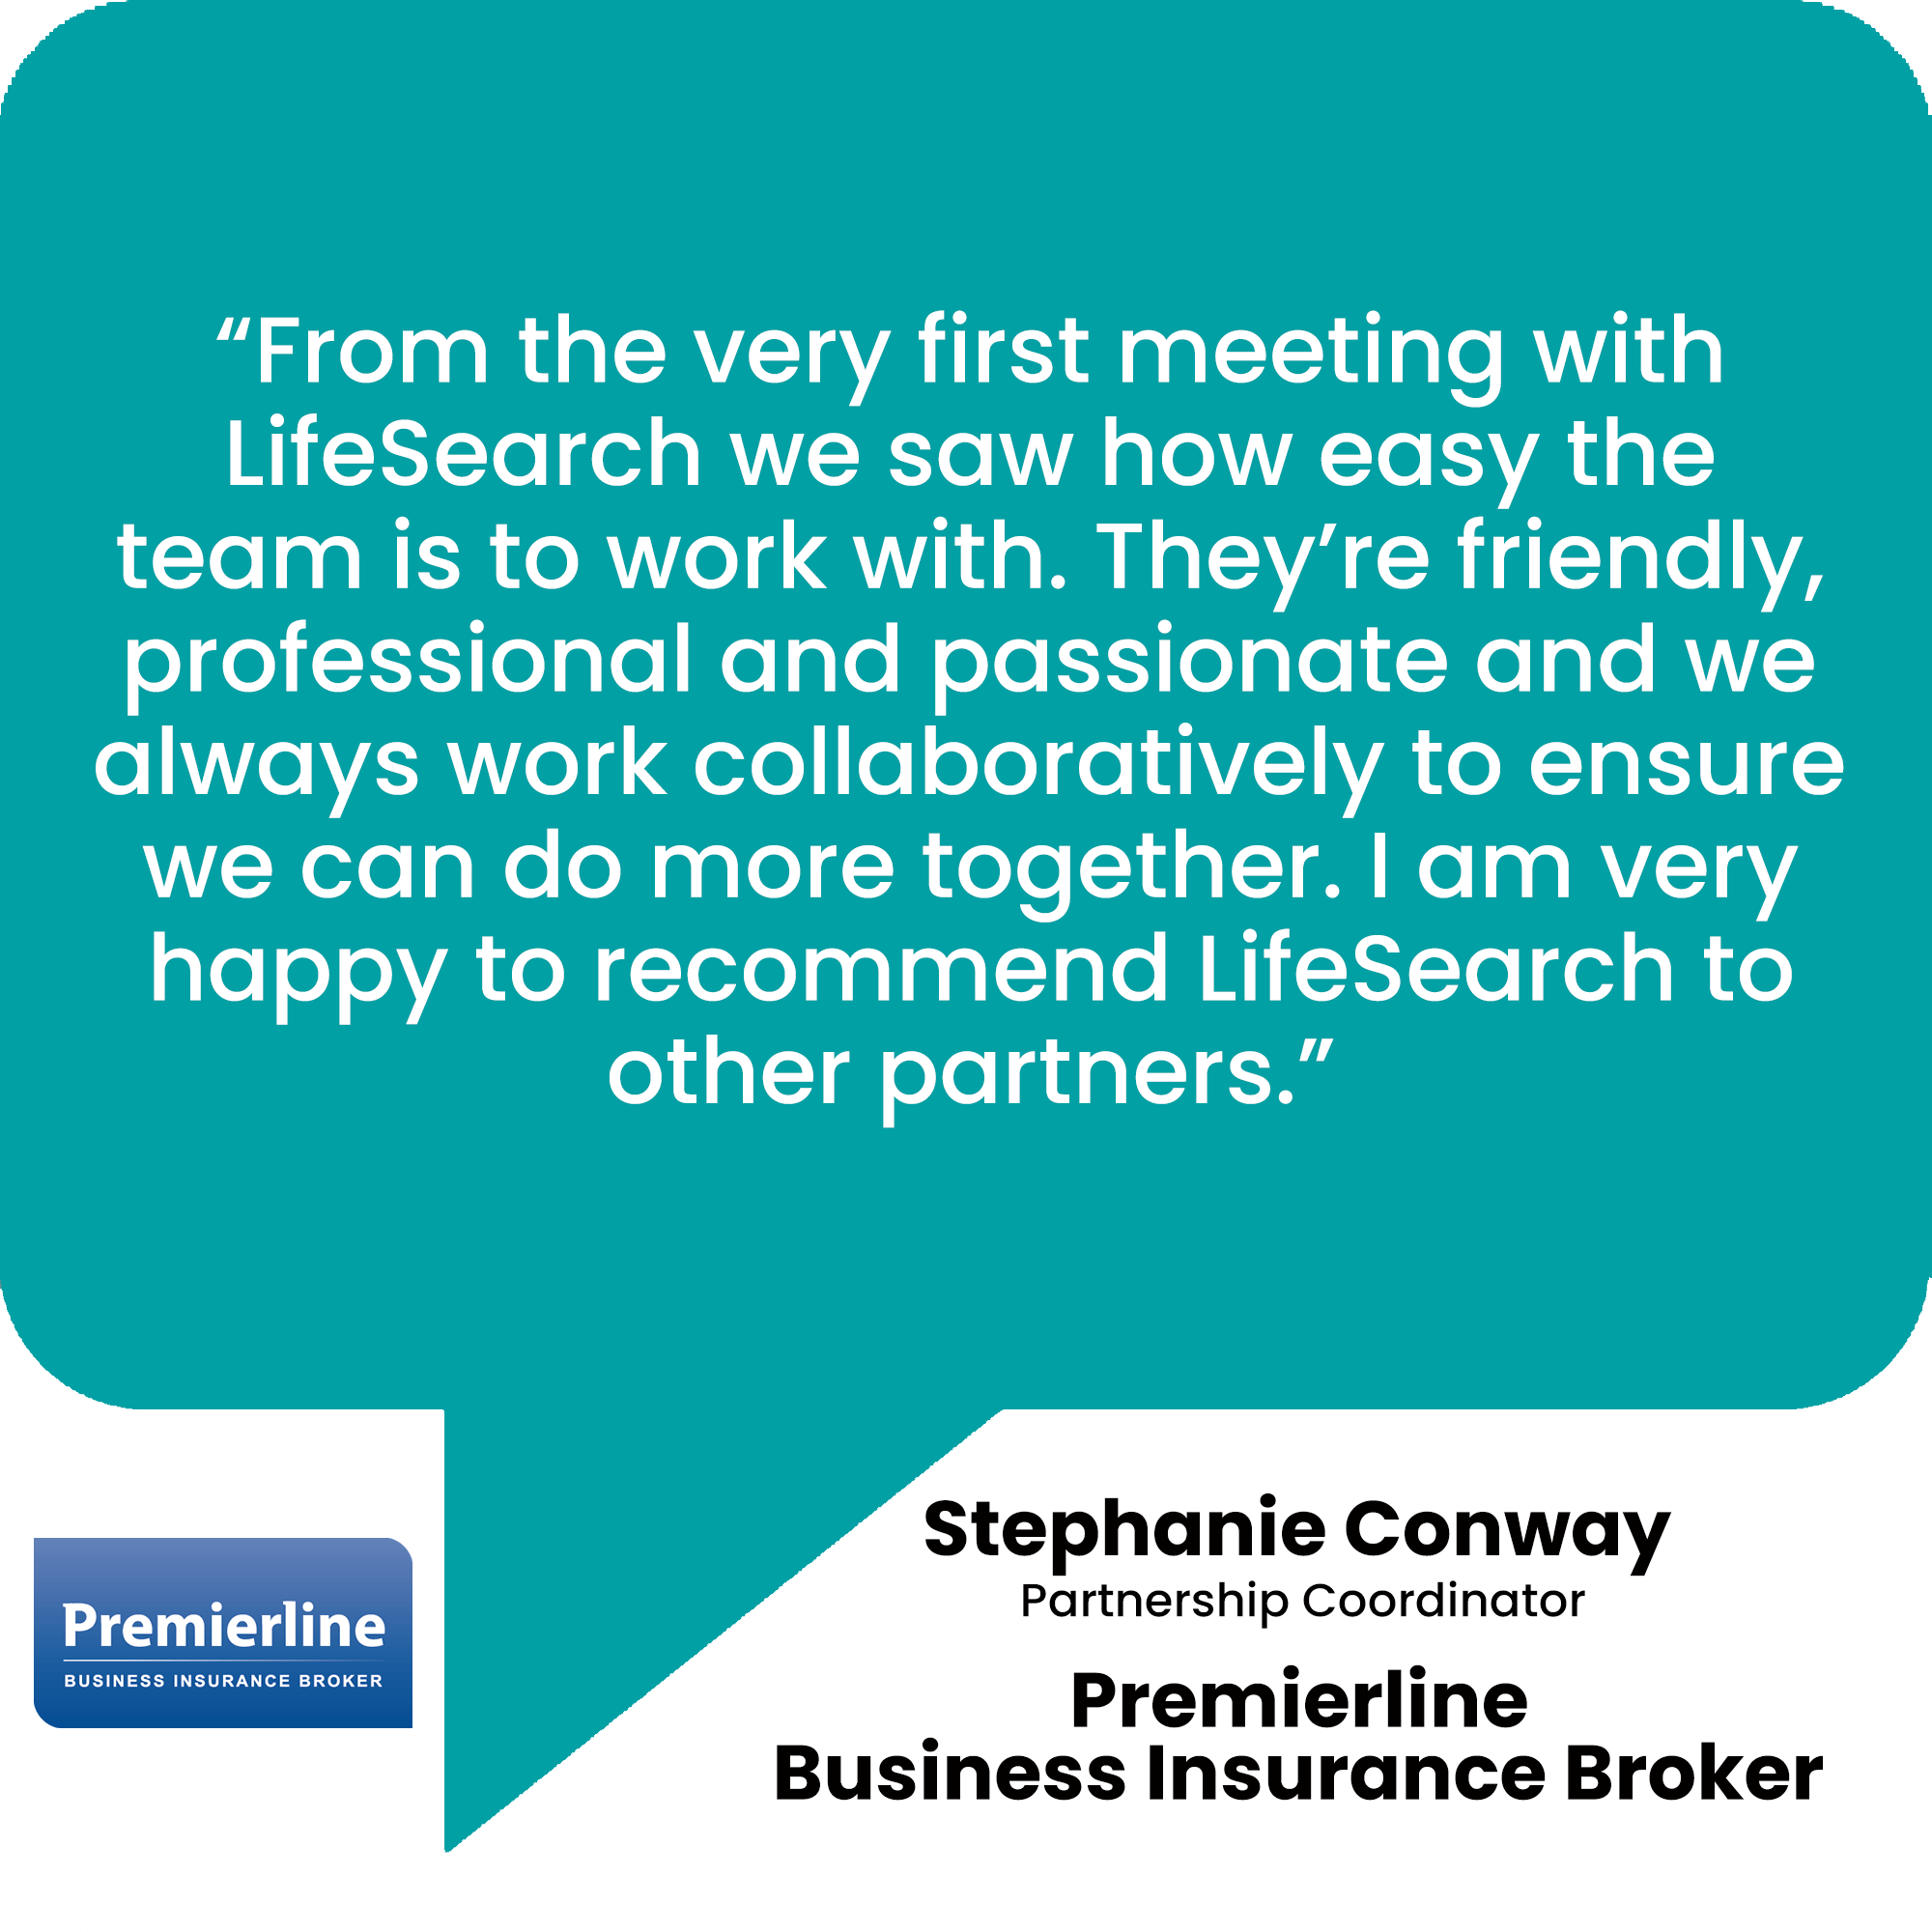 Premierline Testimonial about LifeSearch on Teal Background